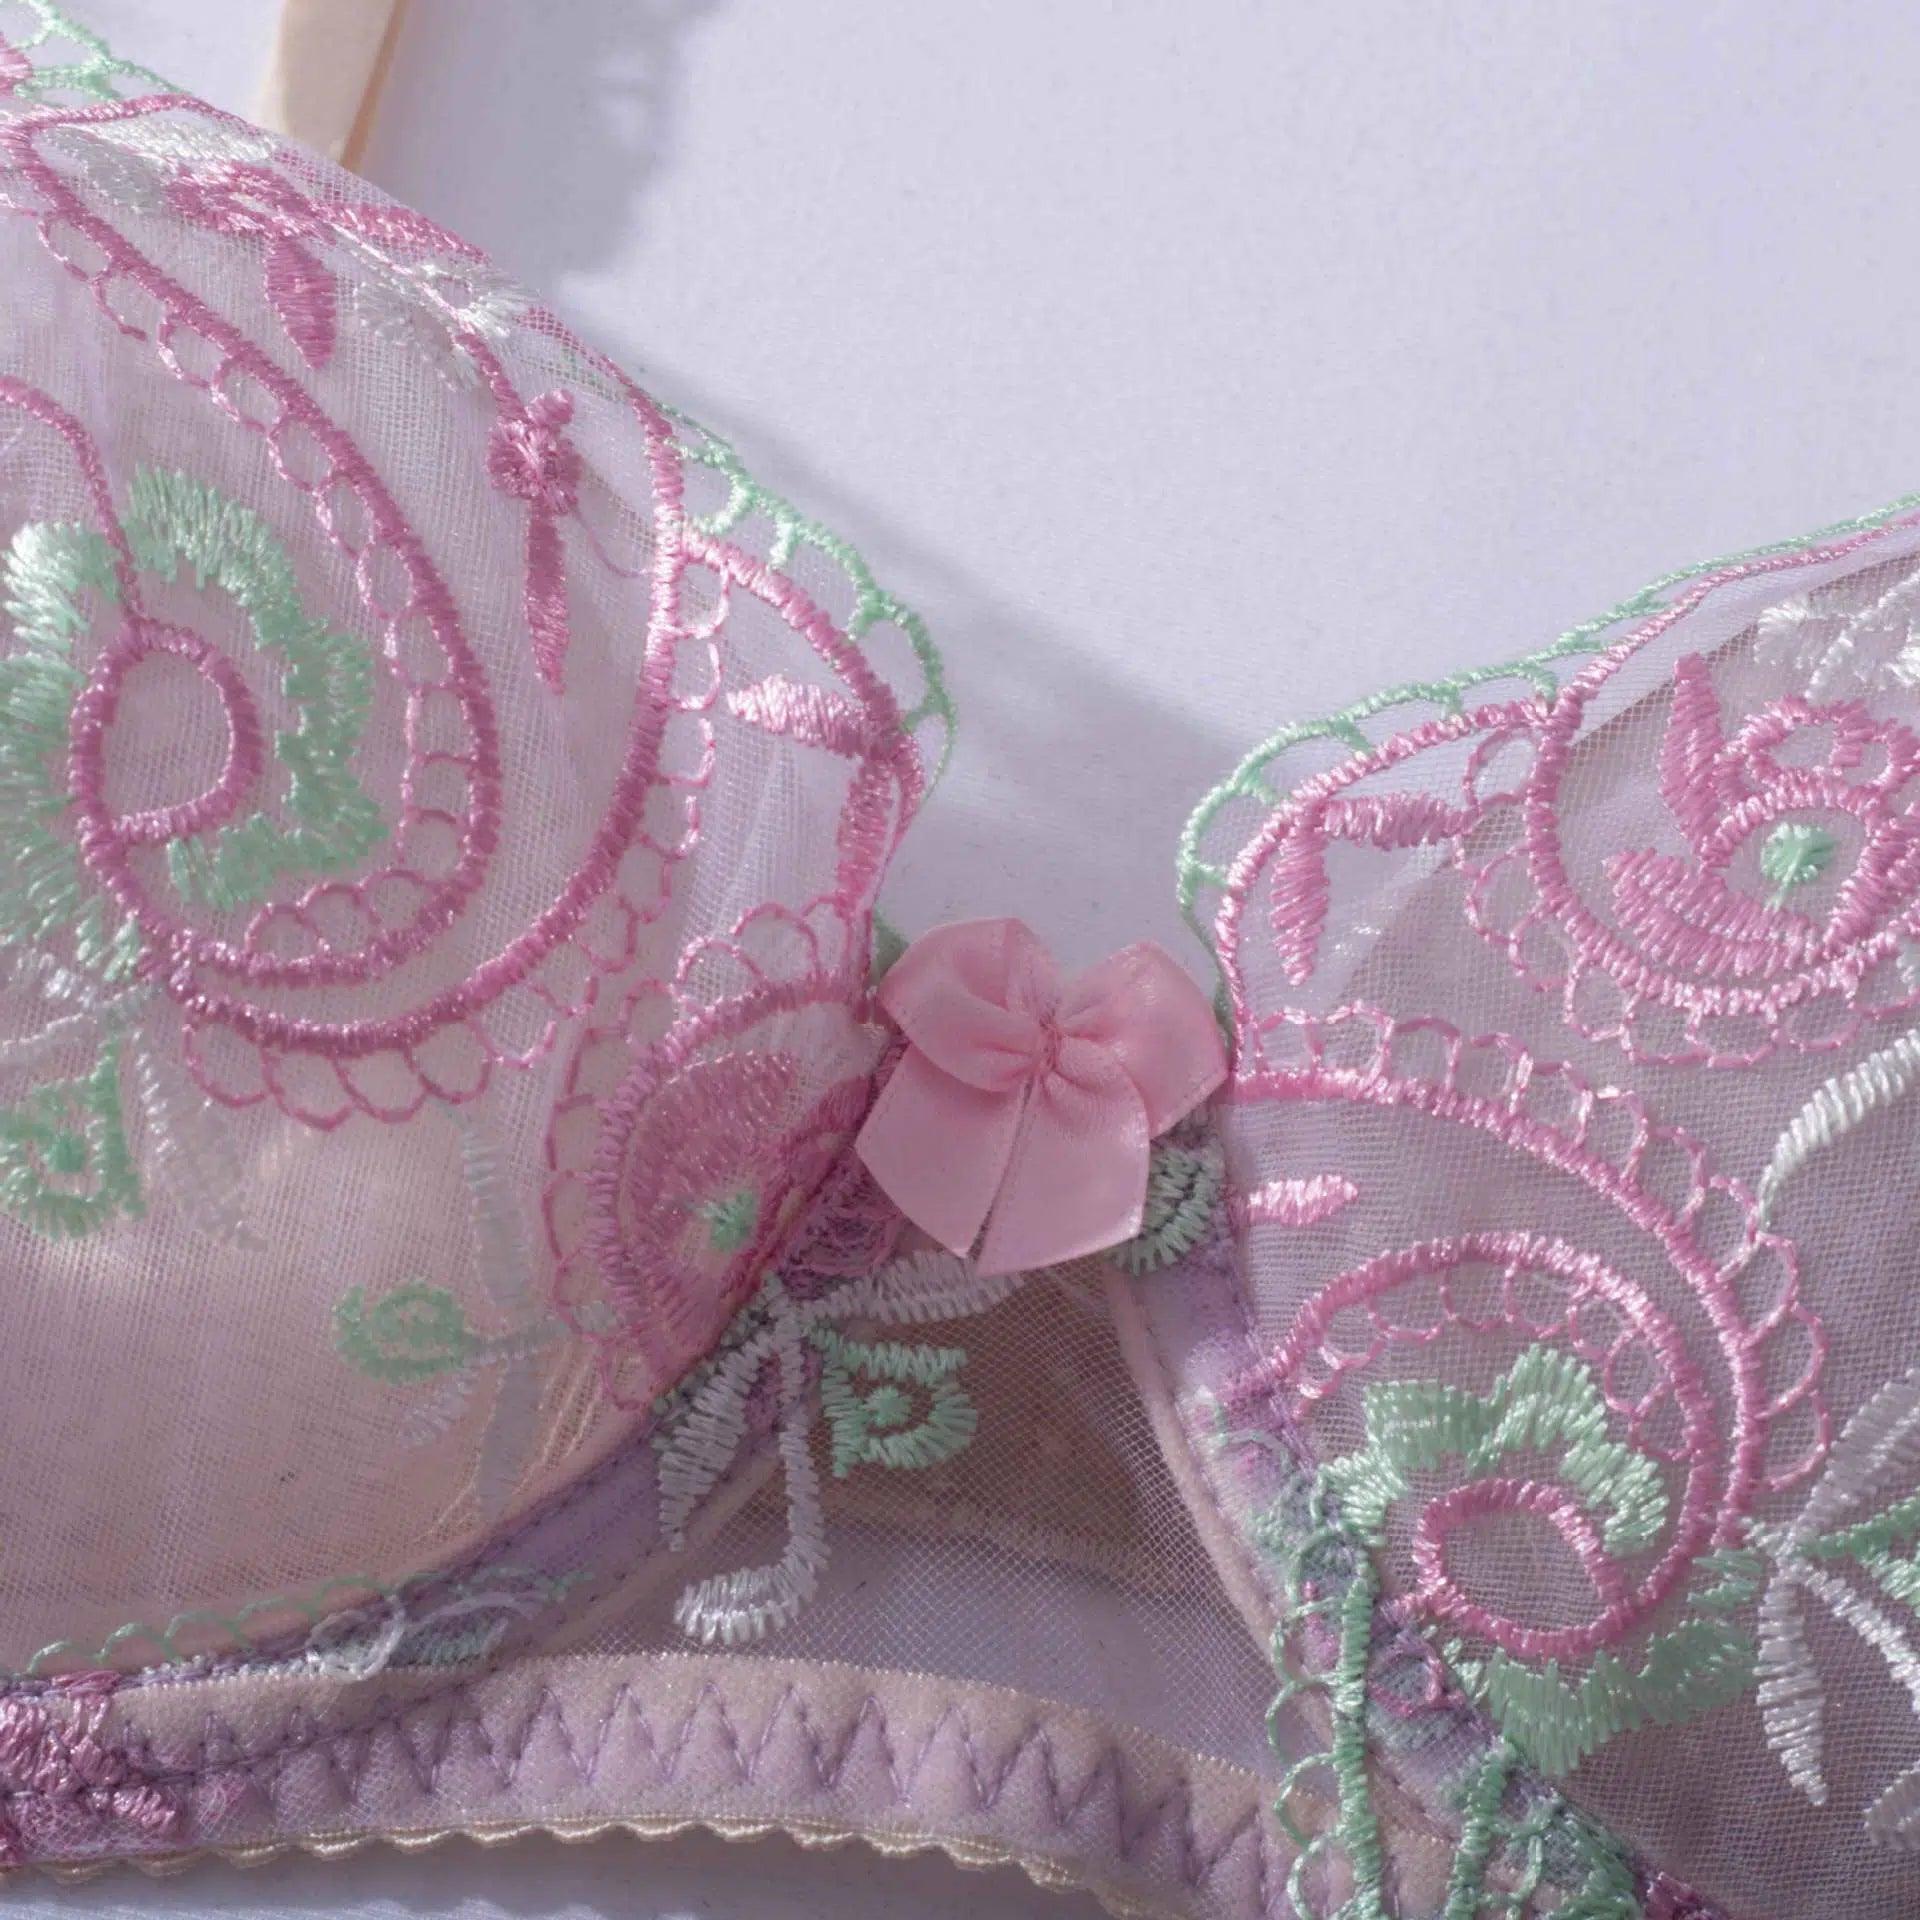 Sheer Mesh Sexy Lingerie Bra Set with Embroidered Flowers - Little Miss Vanilla